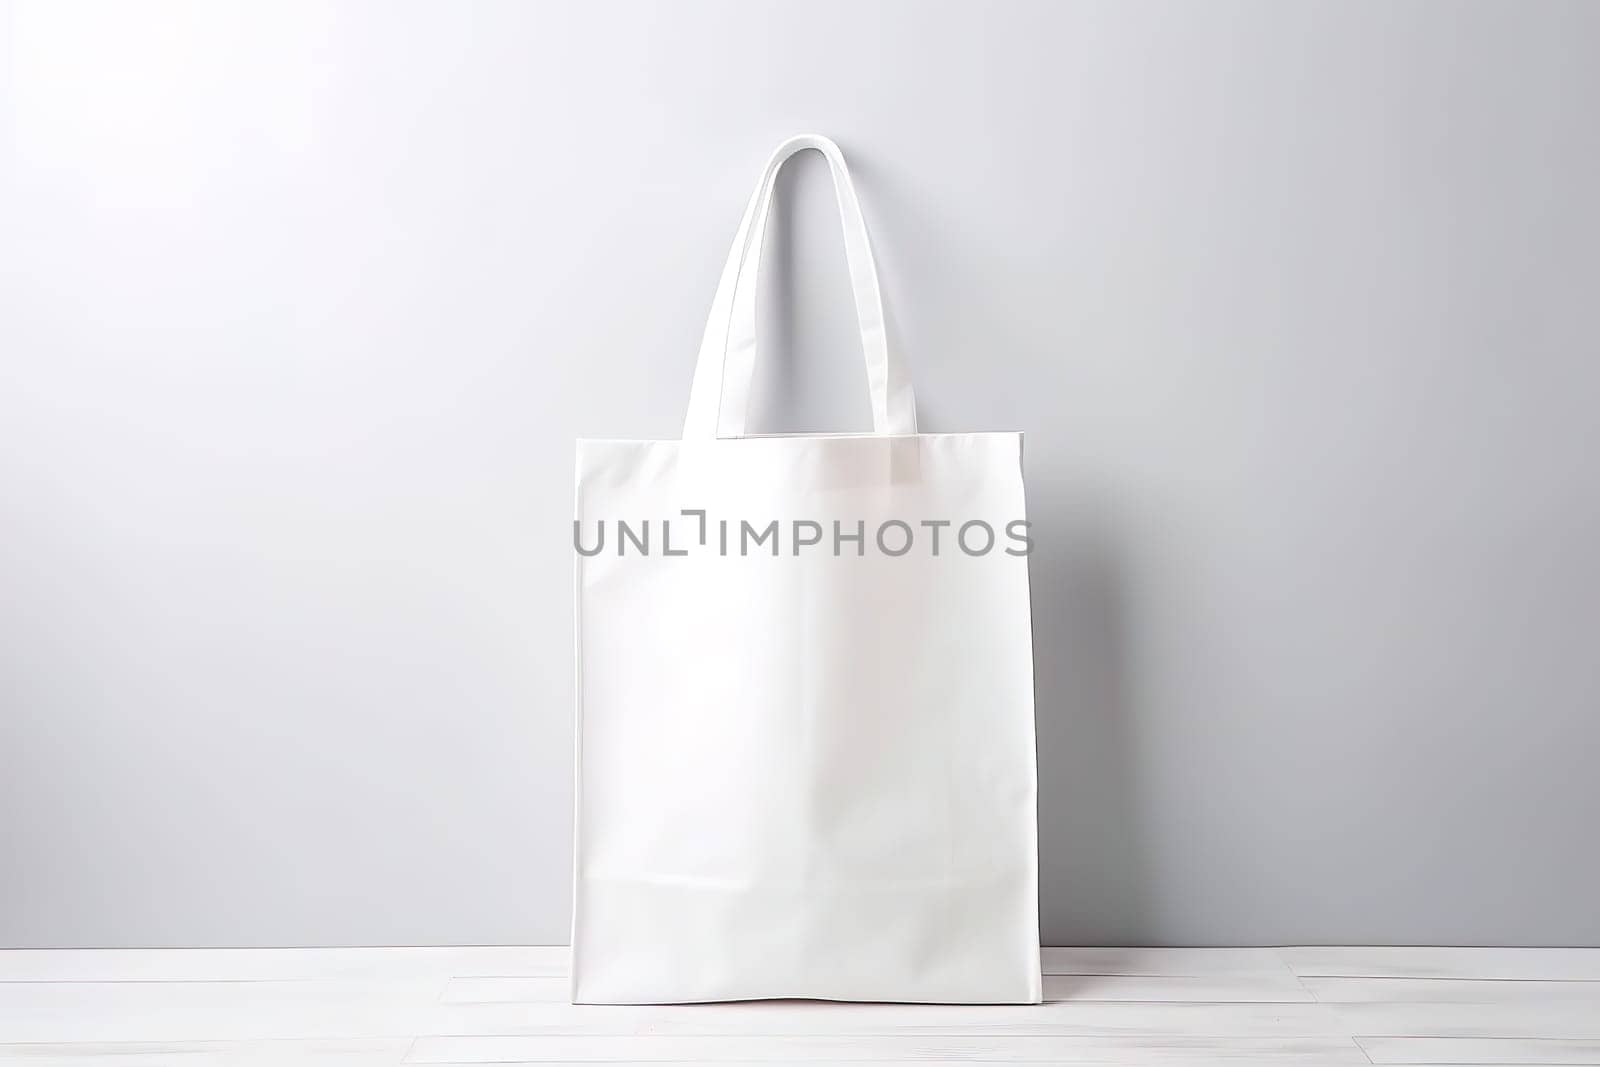 Blank canvas tote bag mockup in white eco friendly design with copy space. Concepts for zero waste movement of shopping bags by FokasuArt